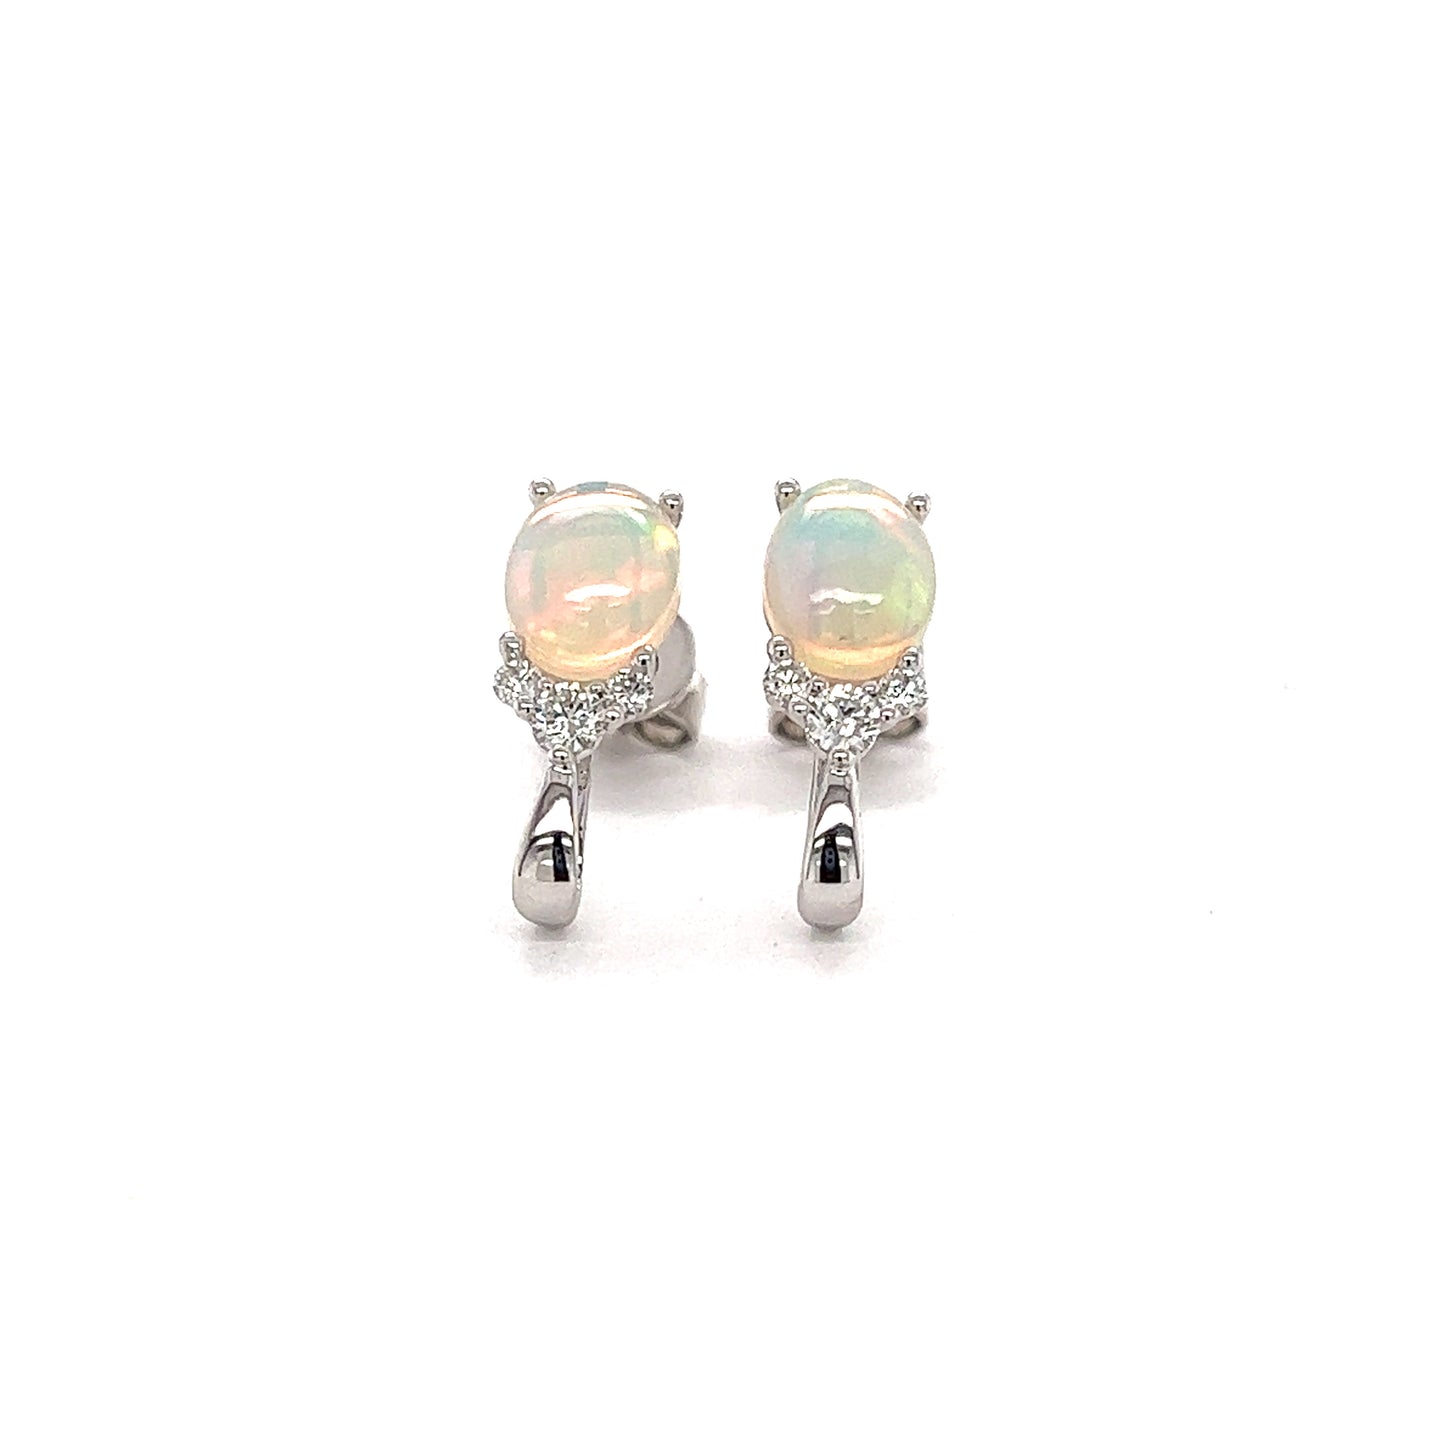 White Ethiopian Opal Stud Earrings with Accent Diamonds in 14K White Gold Front View